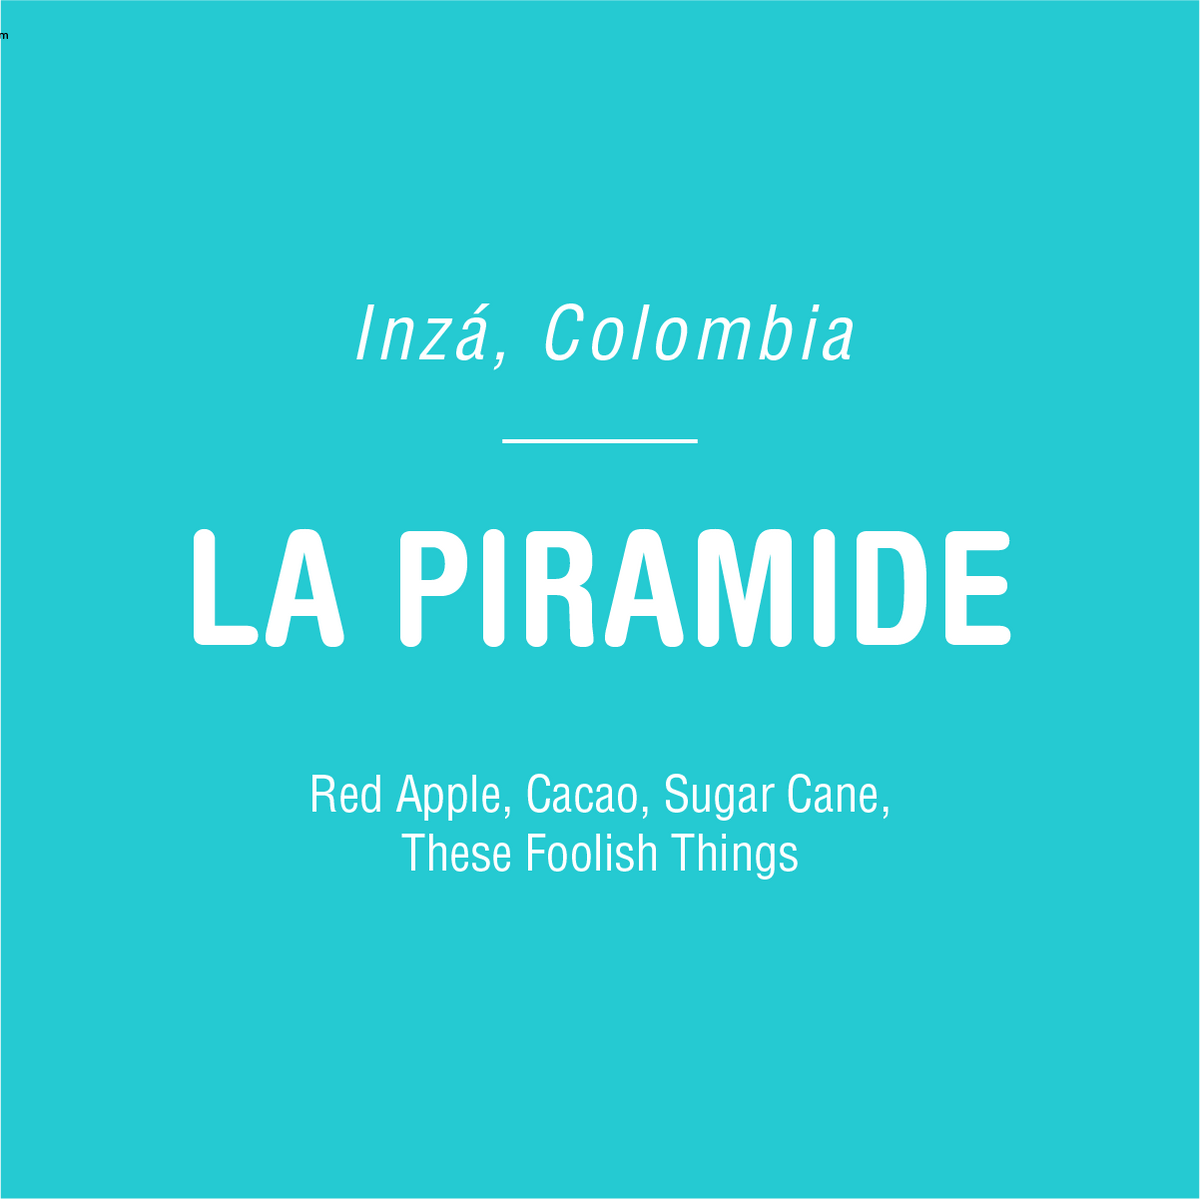 A graphic image with the text "Tandem Coffee Roasters, Colombia" at the top and "La Piramide" in large, bold letters in the center. Below it, the text lists flavors typical of Tandem Coffee Roasters.